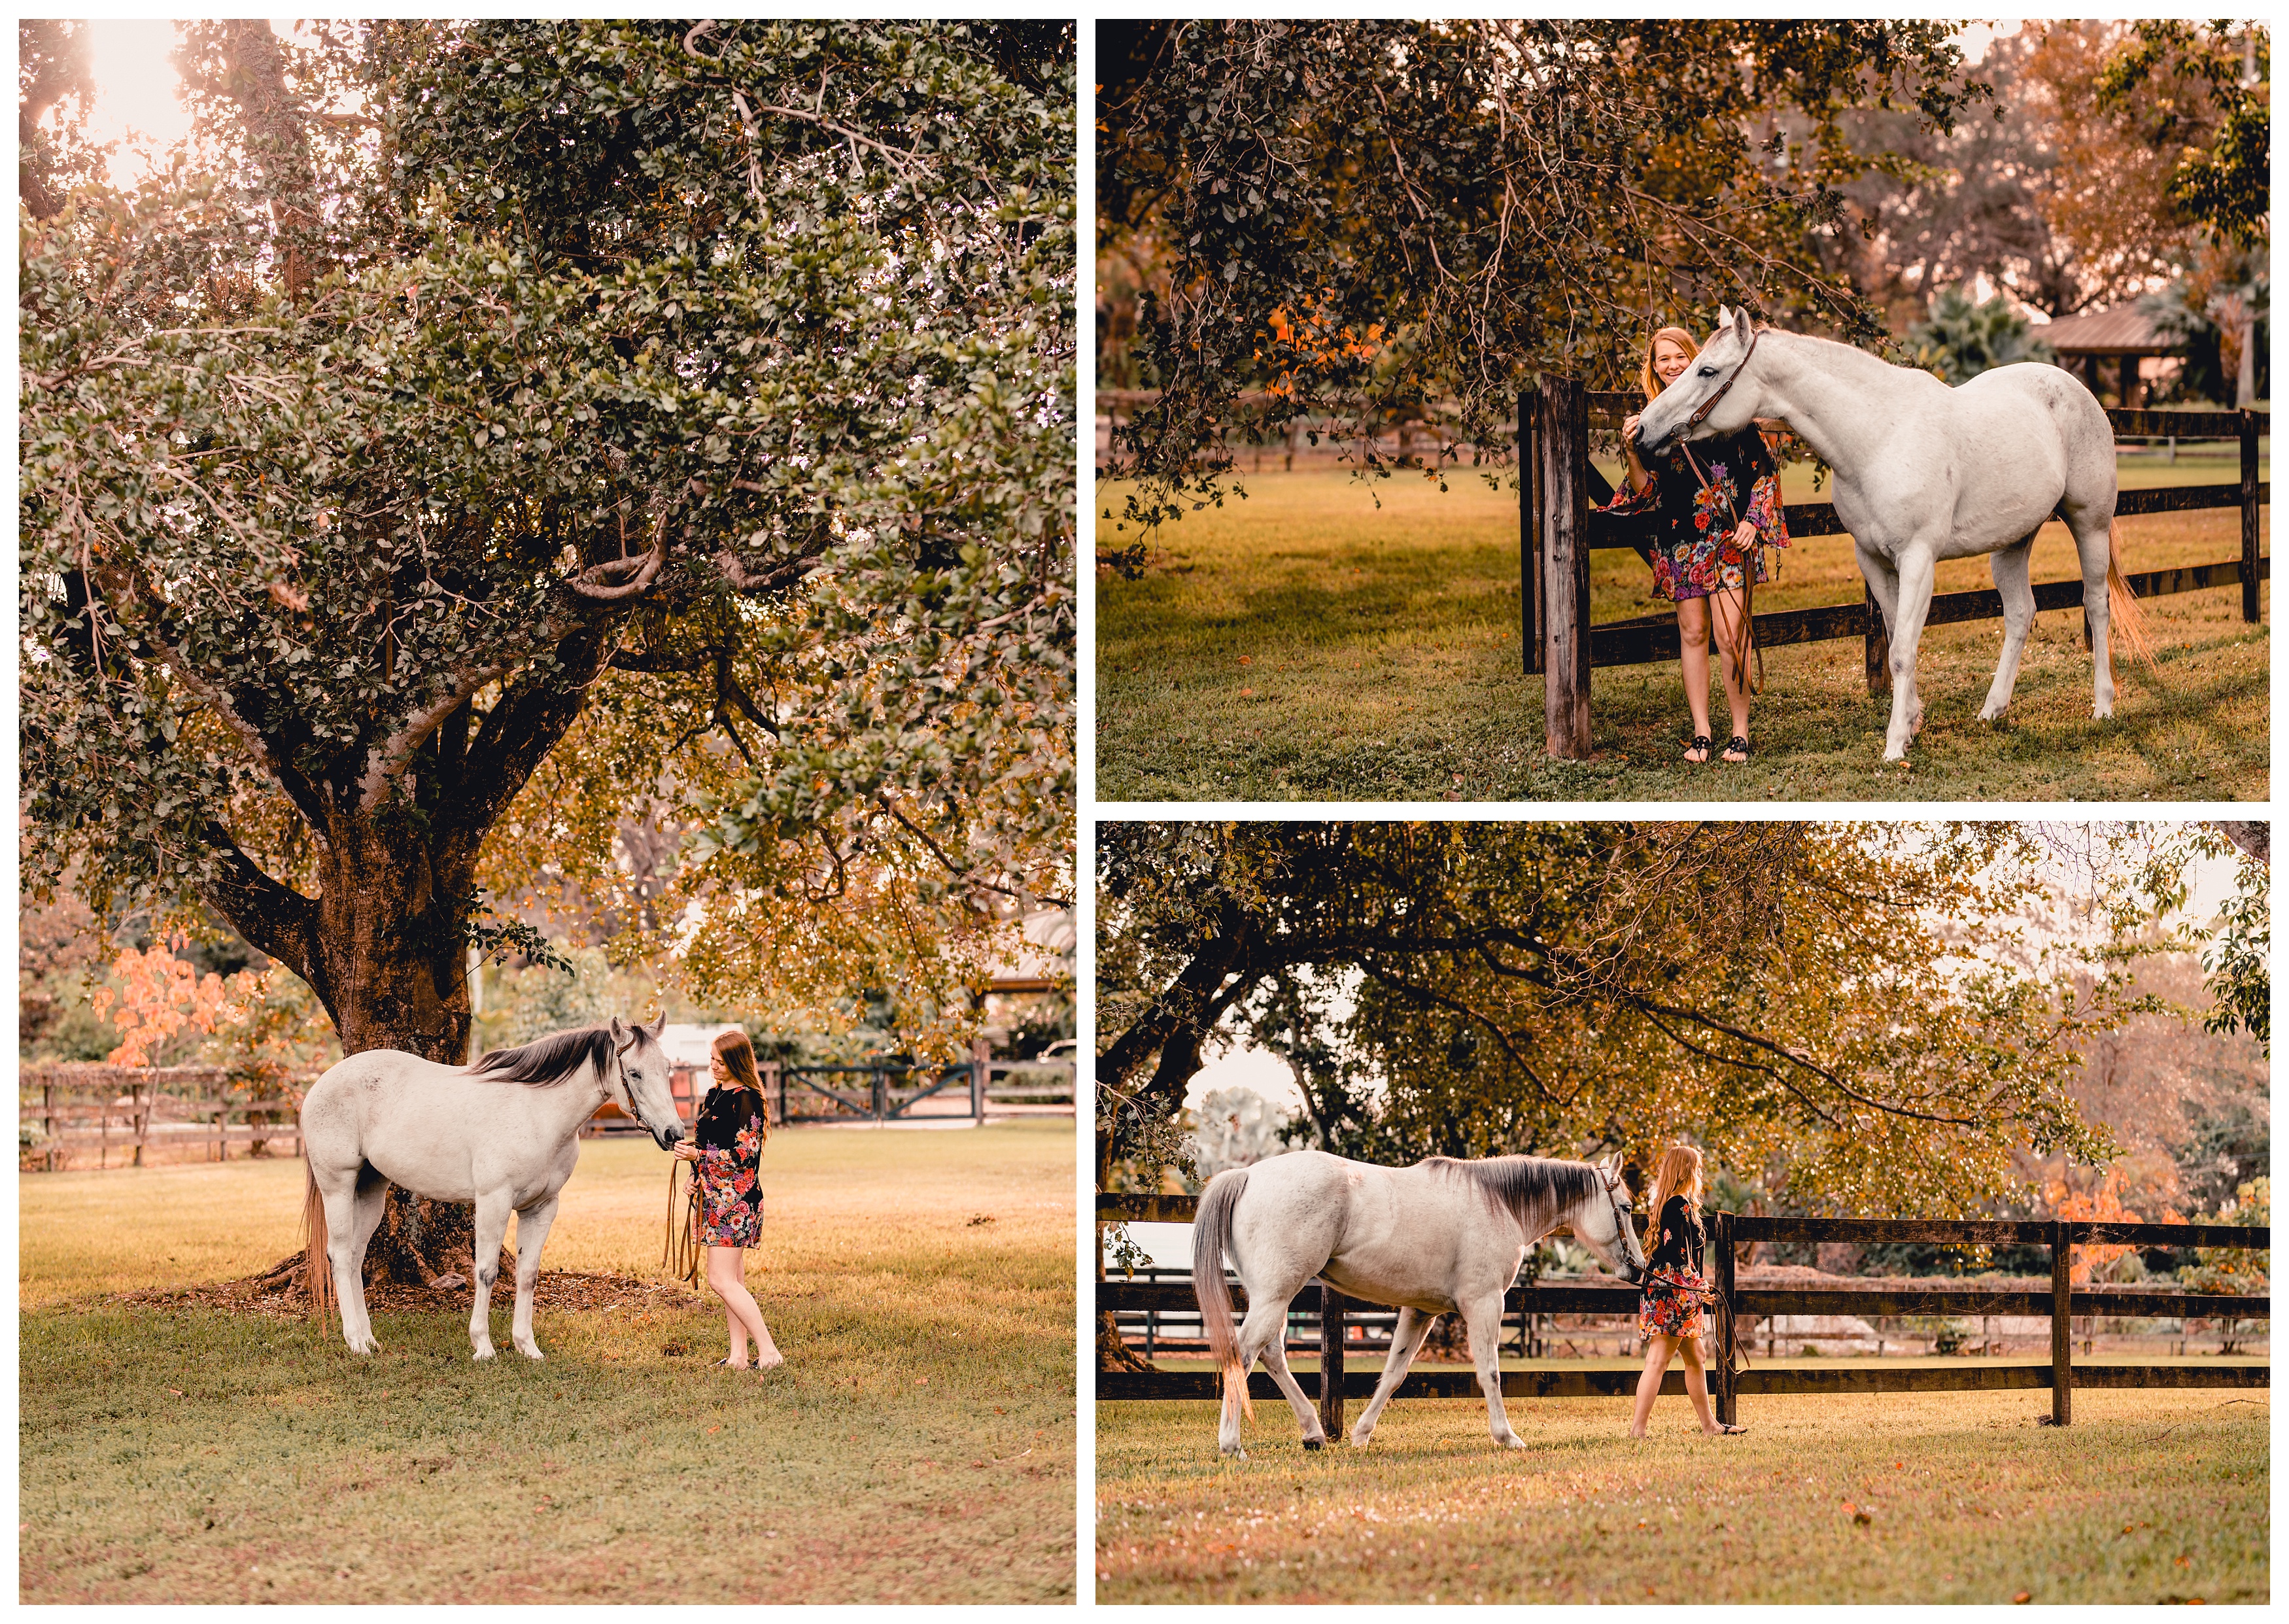 South Florida horse photographer capturing the bond between horse and rider. Shelly Williams Photography